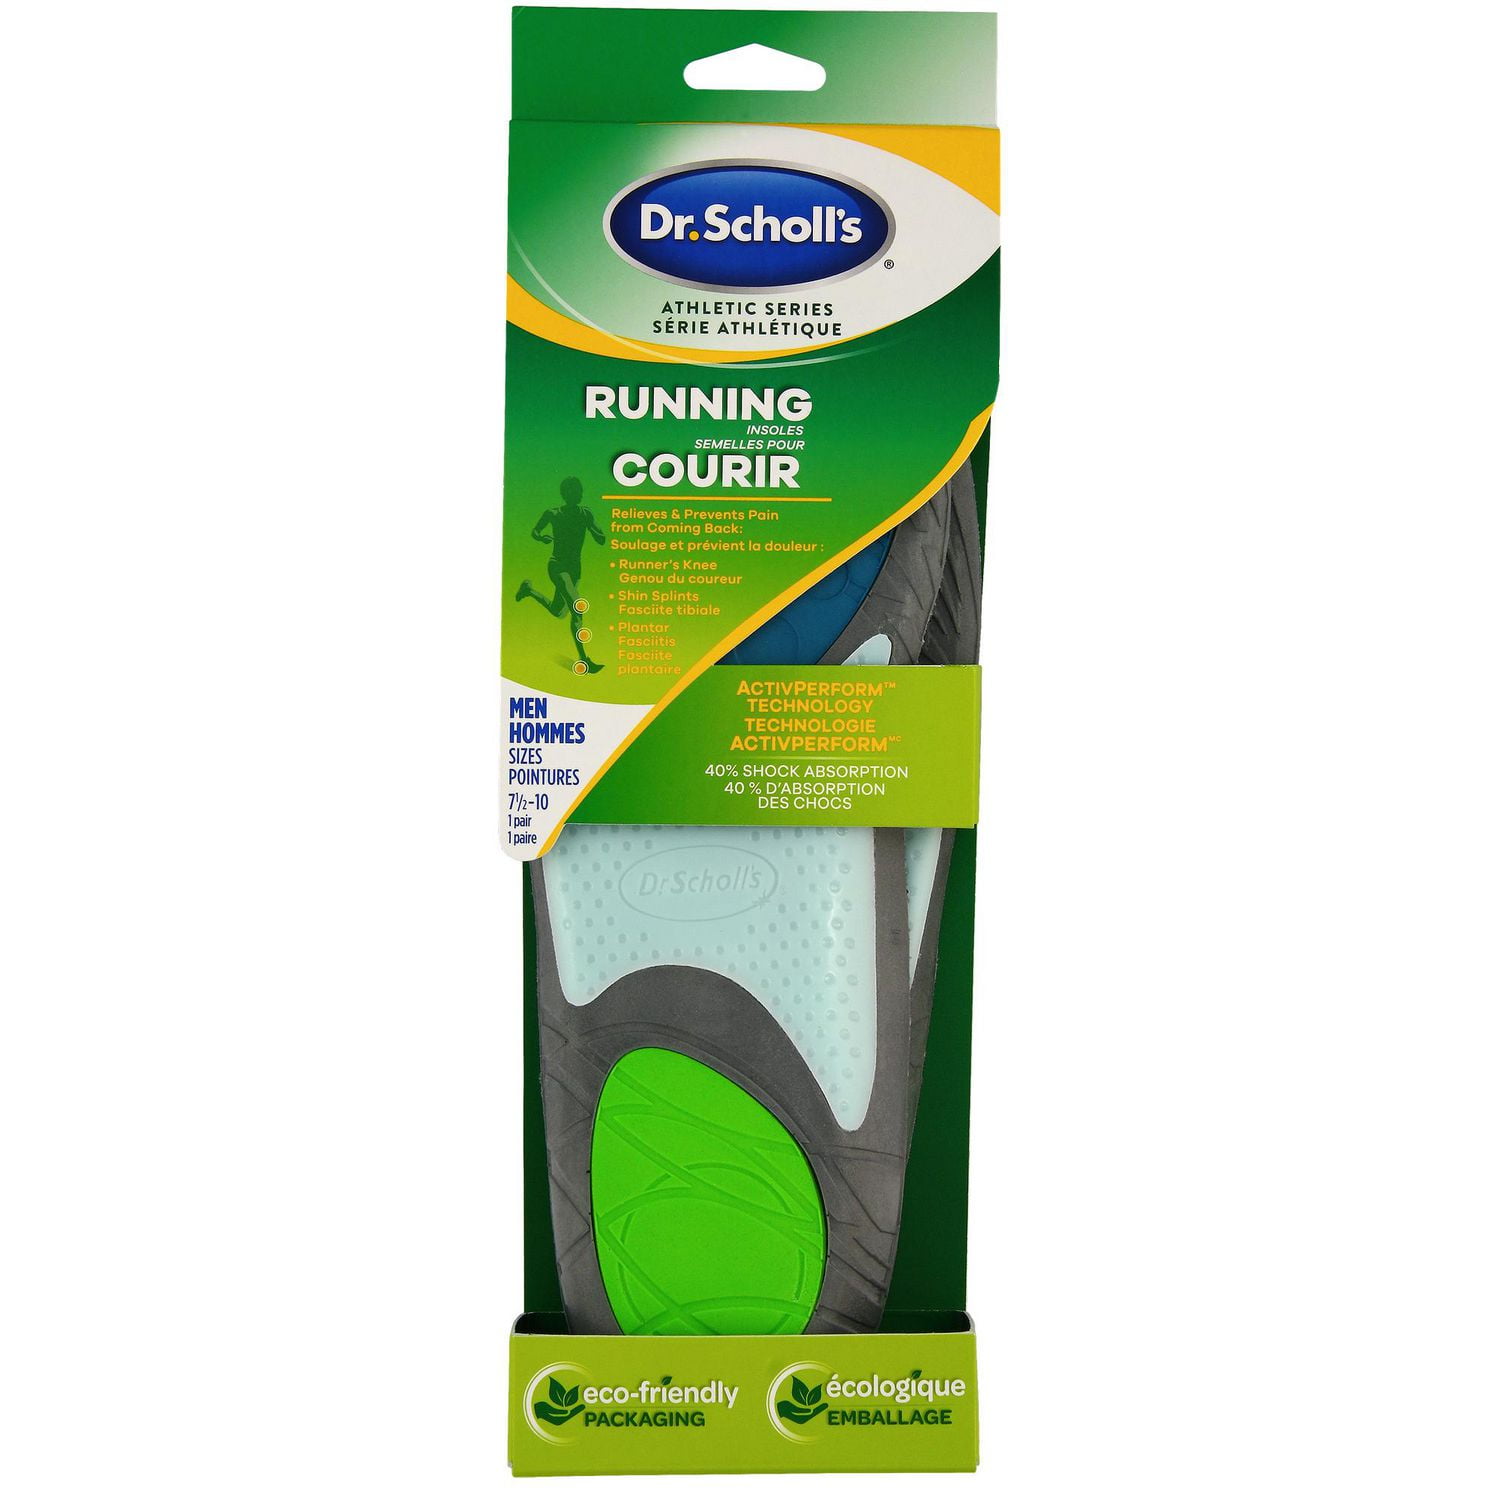 Dr. Scholl's Athletic Series Running Insoles Mens, 1 pair 